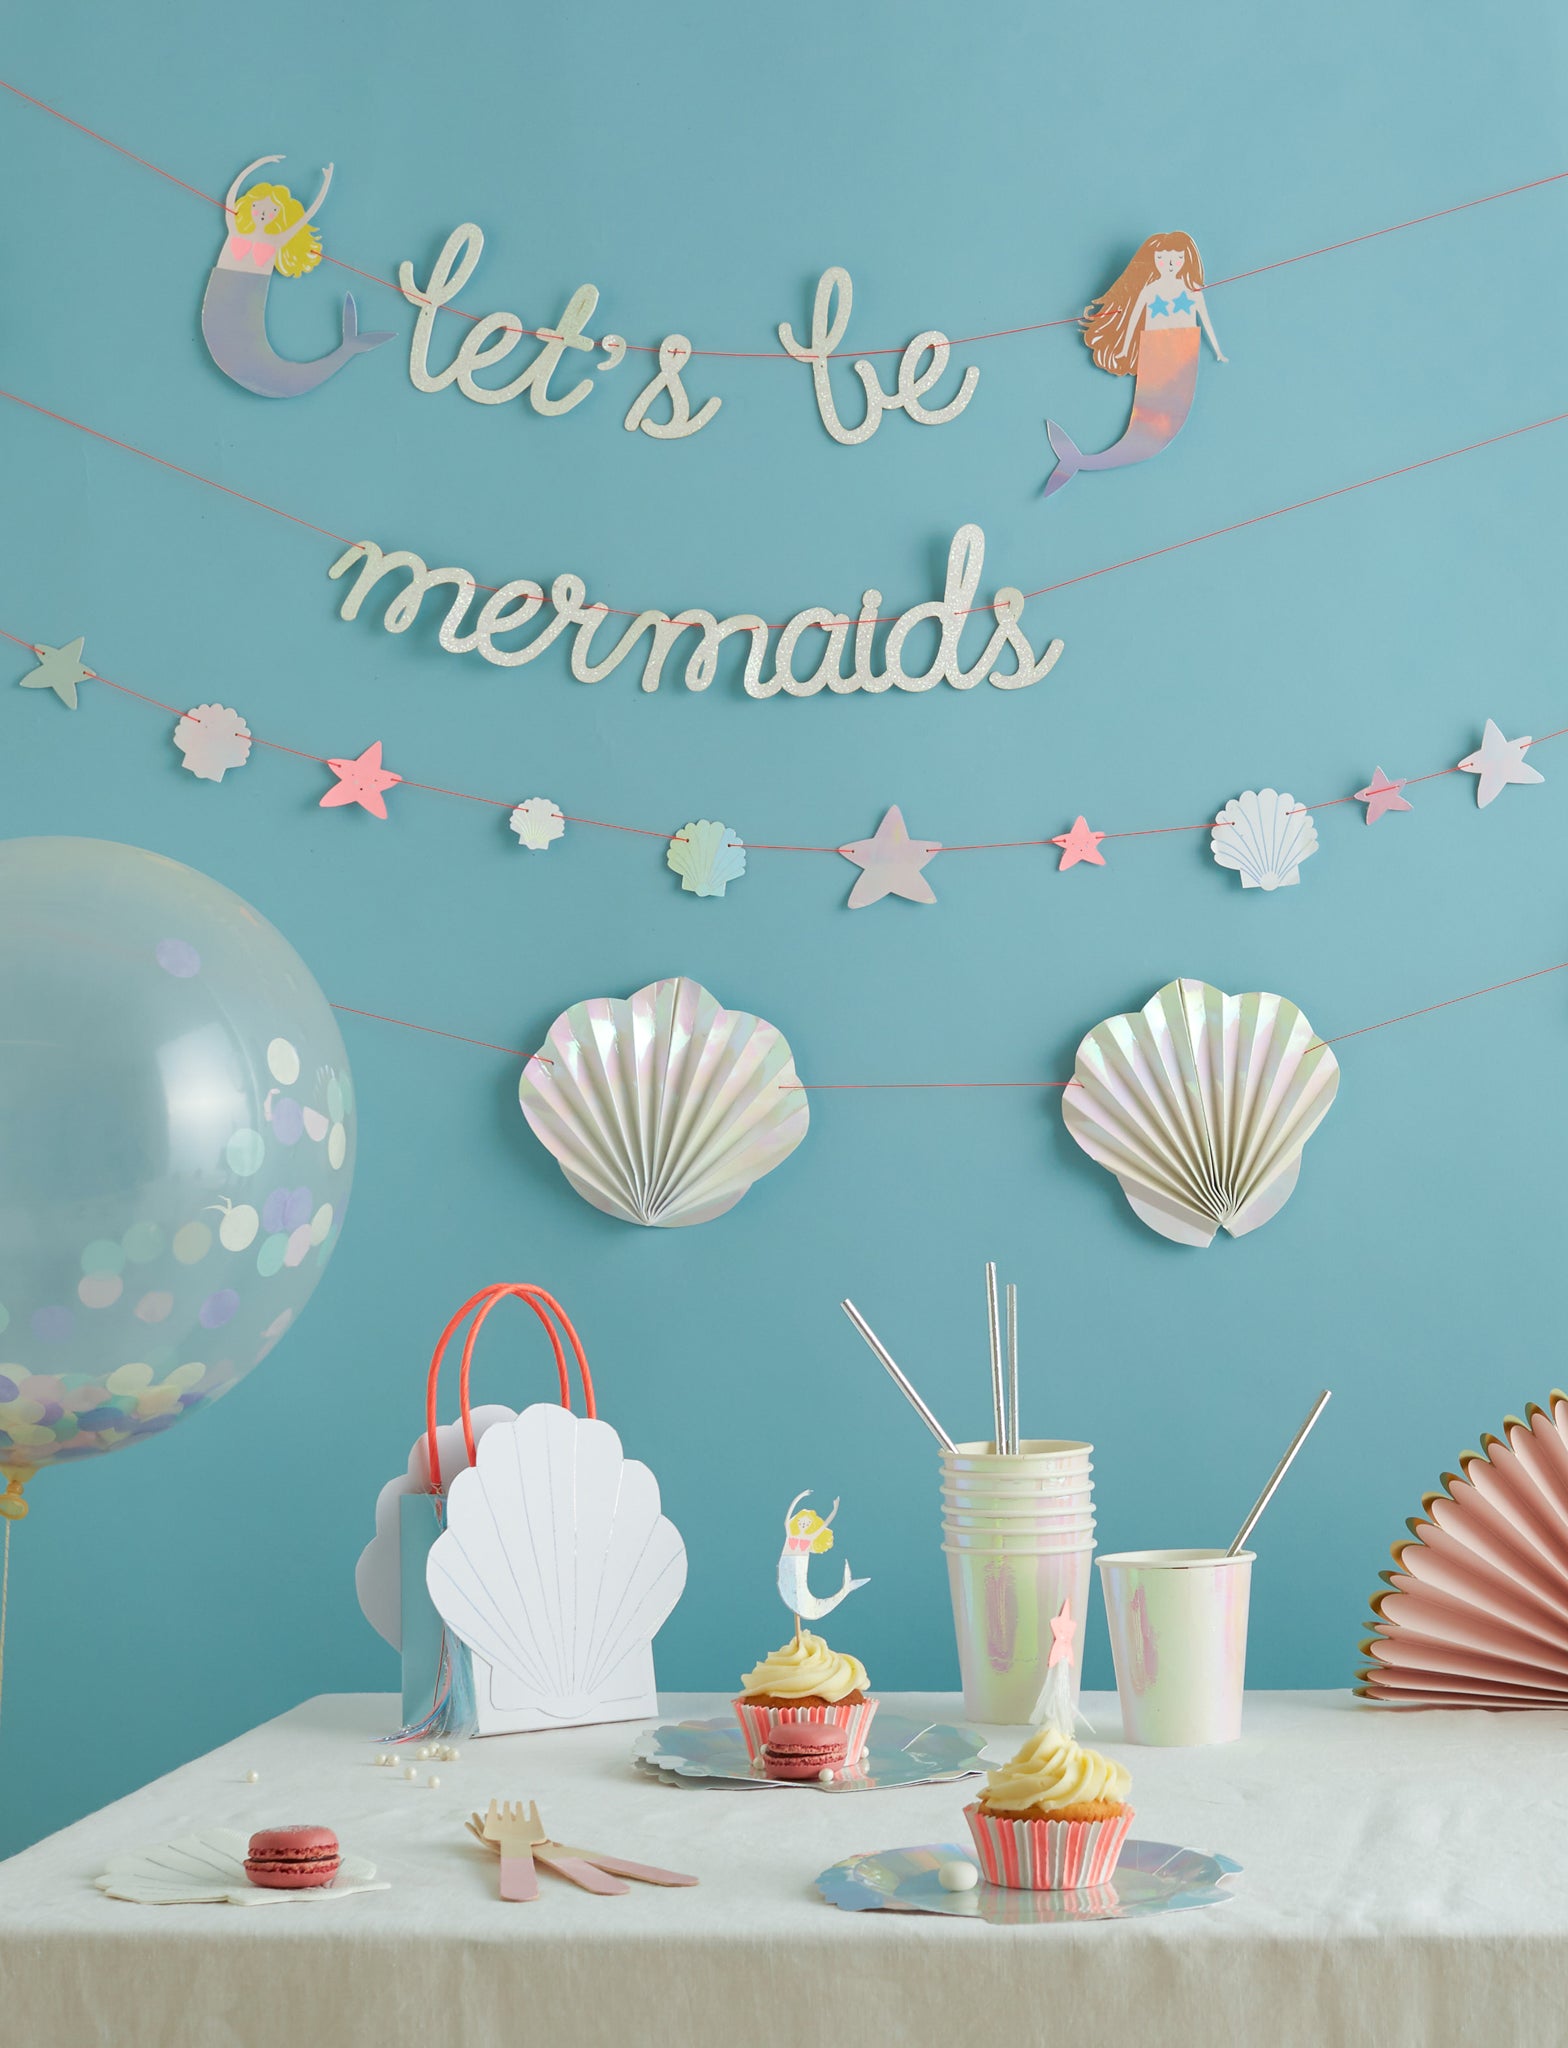 They're perfect for any "under the sea" theme, from Clown Fish to Mermaids, to beach themed bridal or baby showers. The shell shaped plates, favor boxes, and napkins are polished with holographic foil and sure to shimmer.